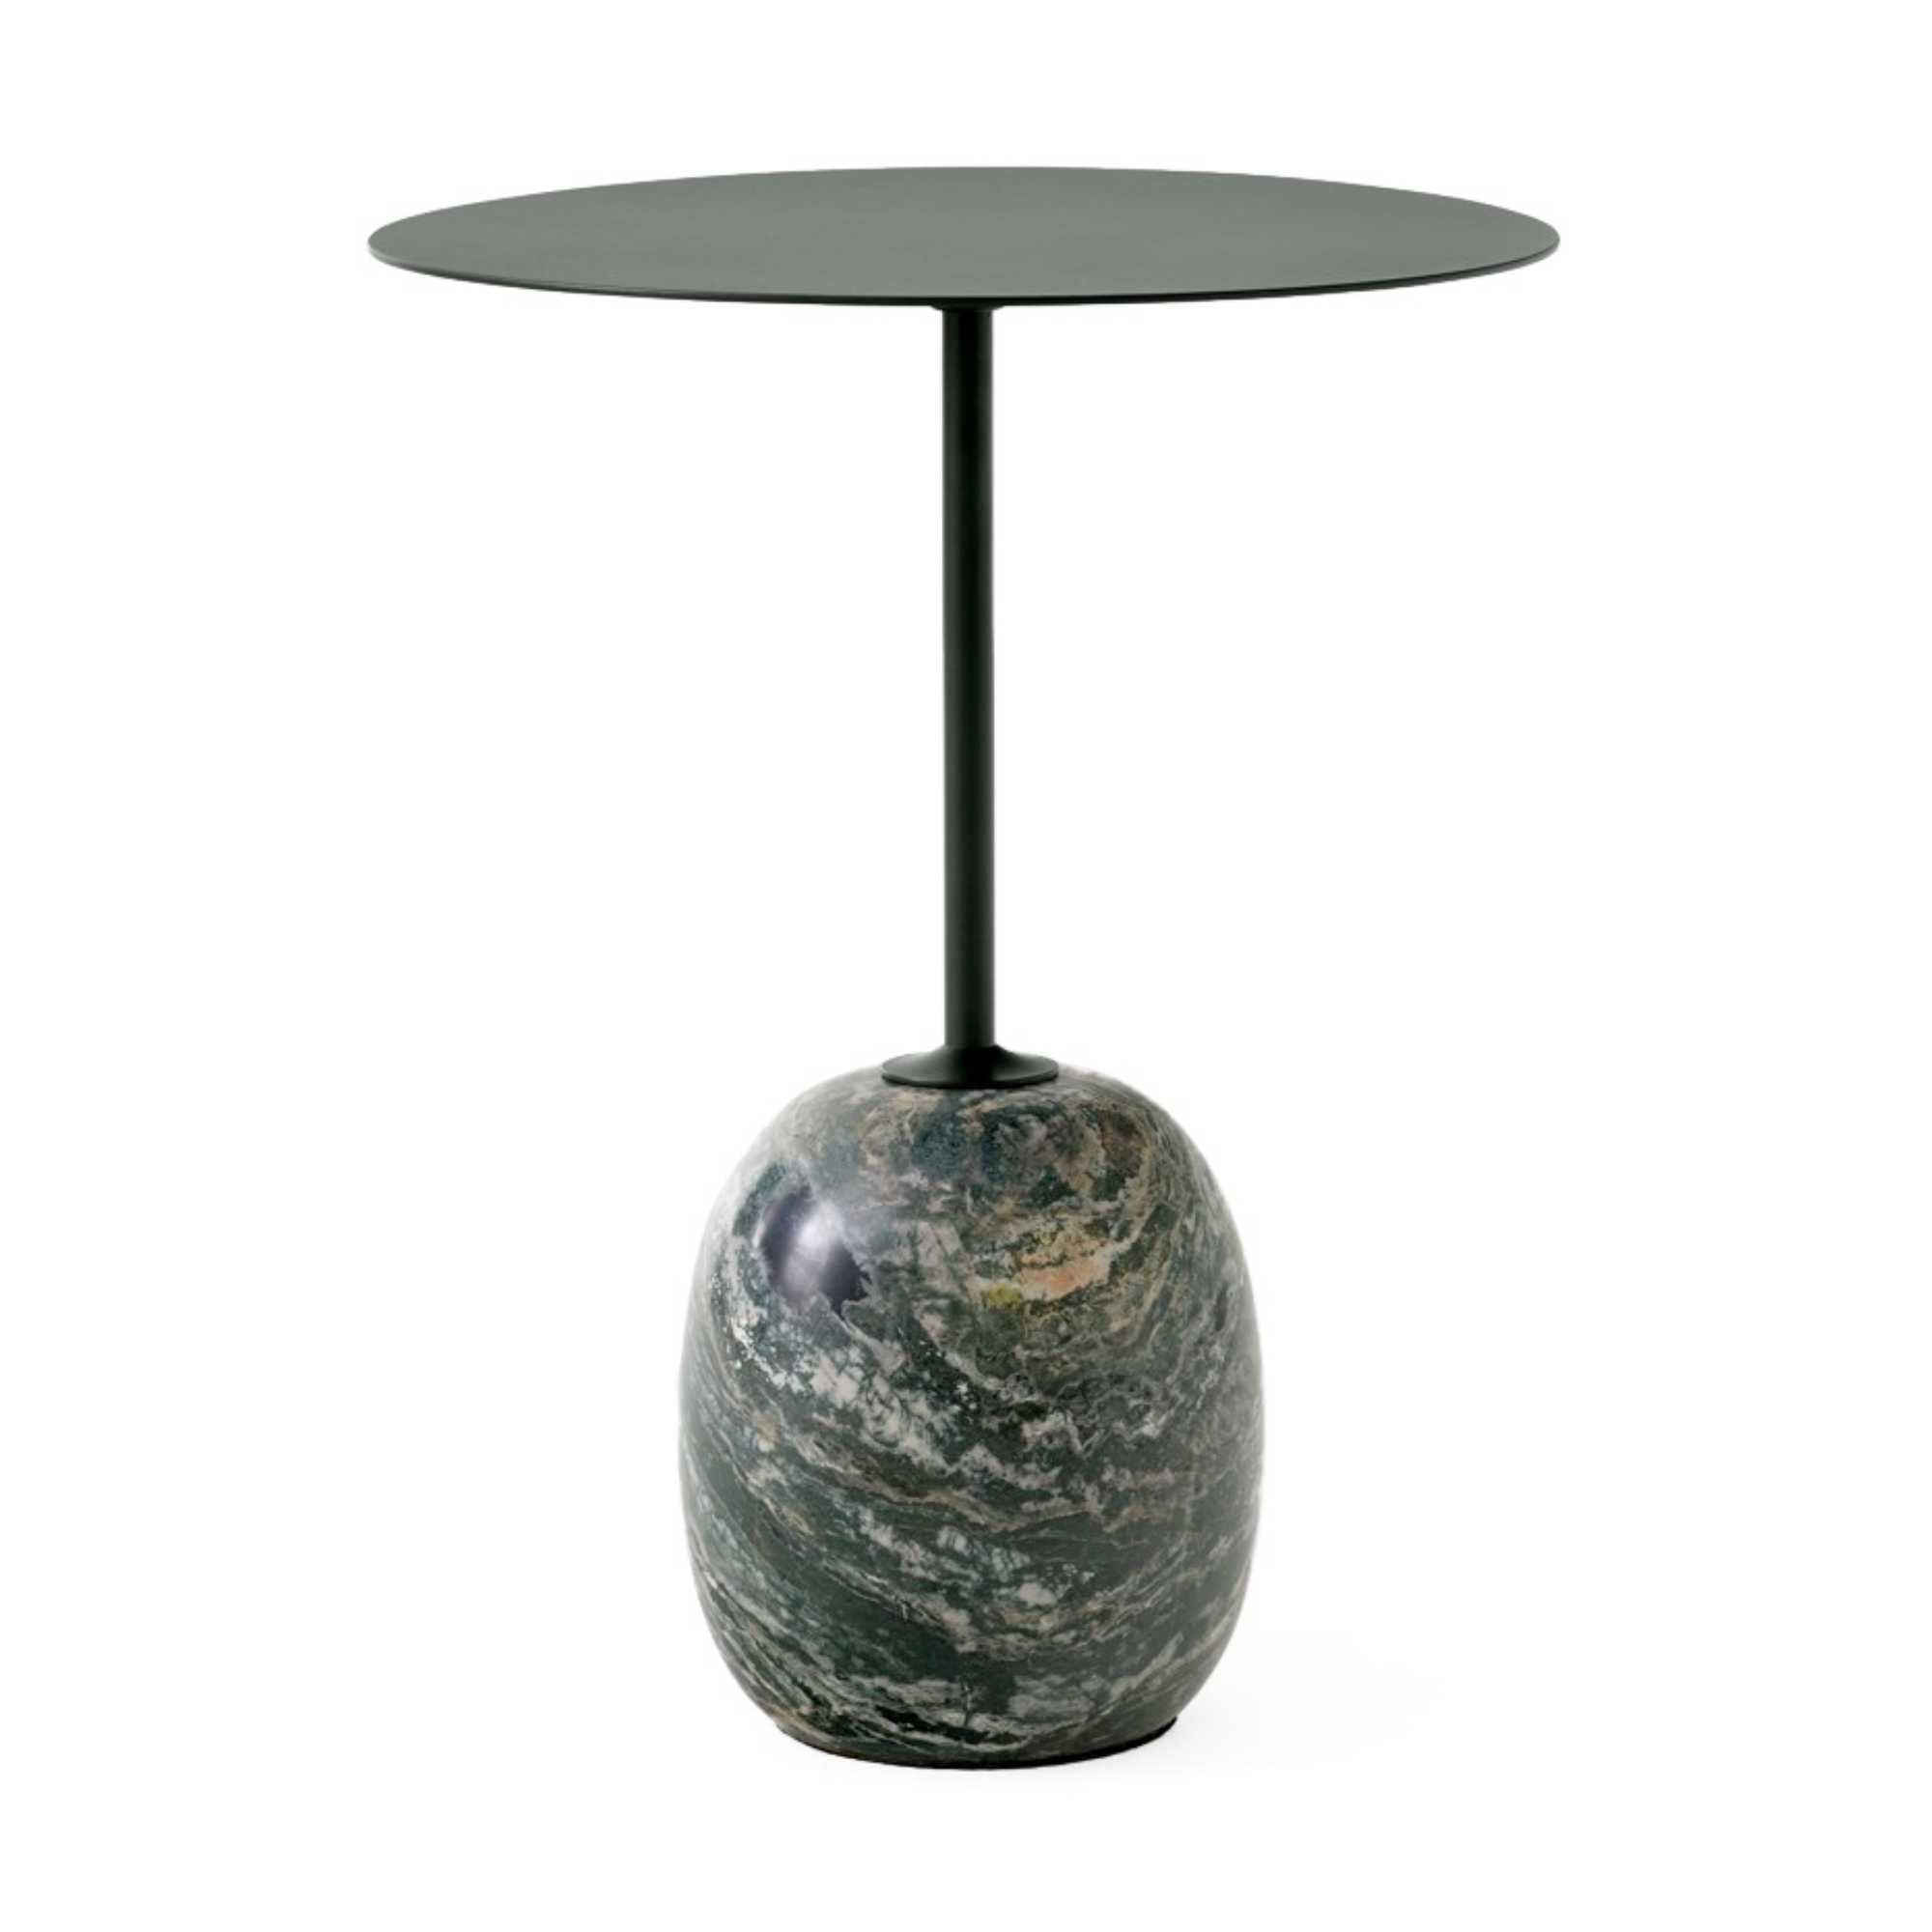 &Tradition LN8 Lato Side Table , Deep Green/Verde Alpi Marble